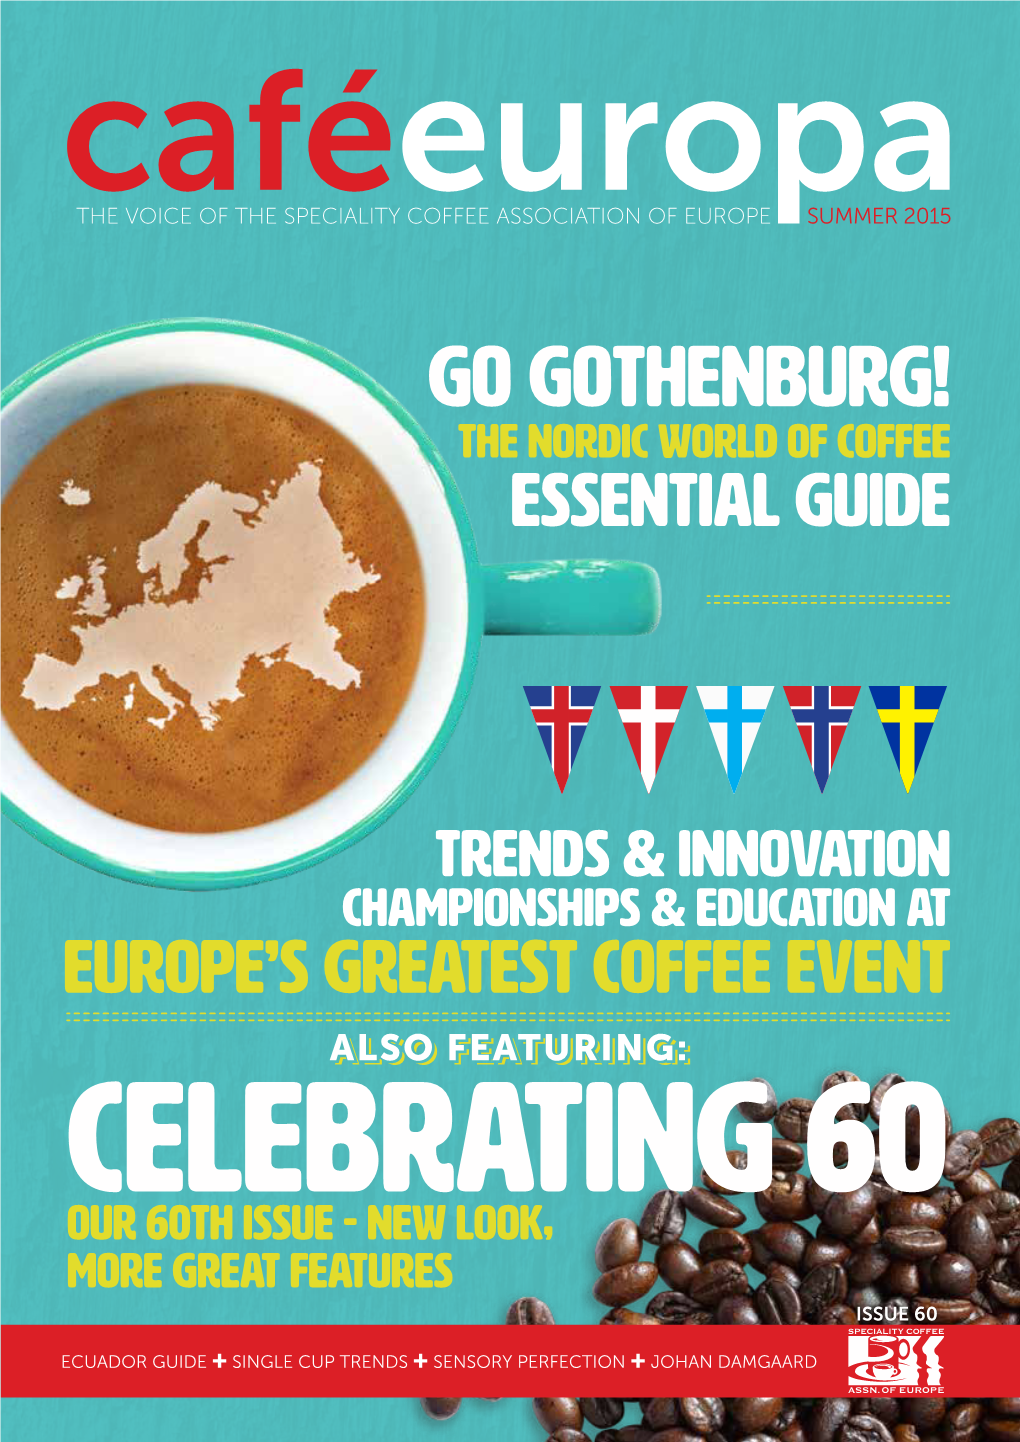 Go Gothenburg! the Nordic World of Coffee ESSENTIAL GUIDE